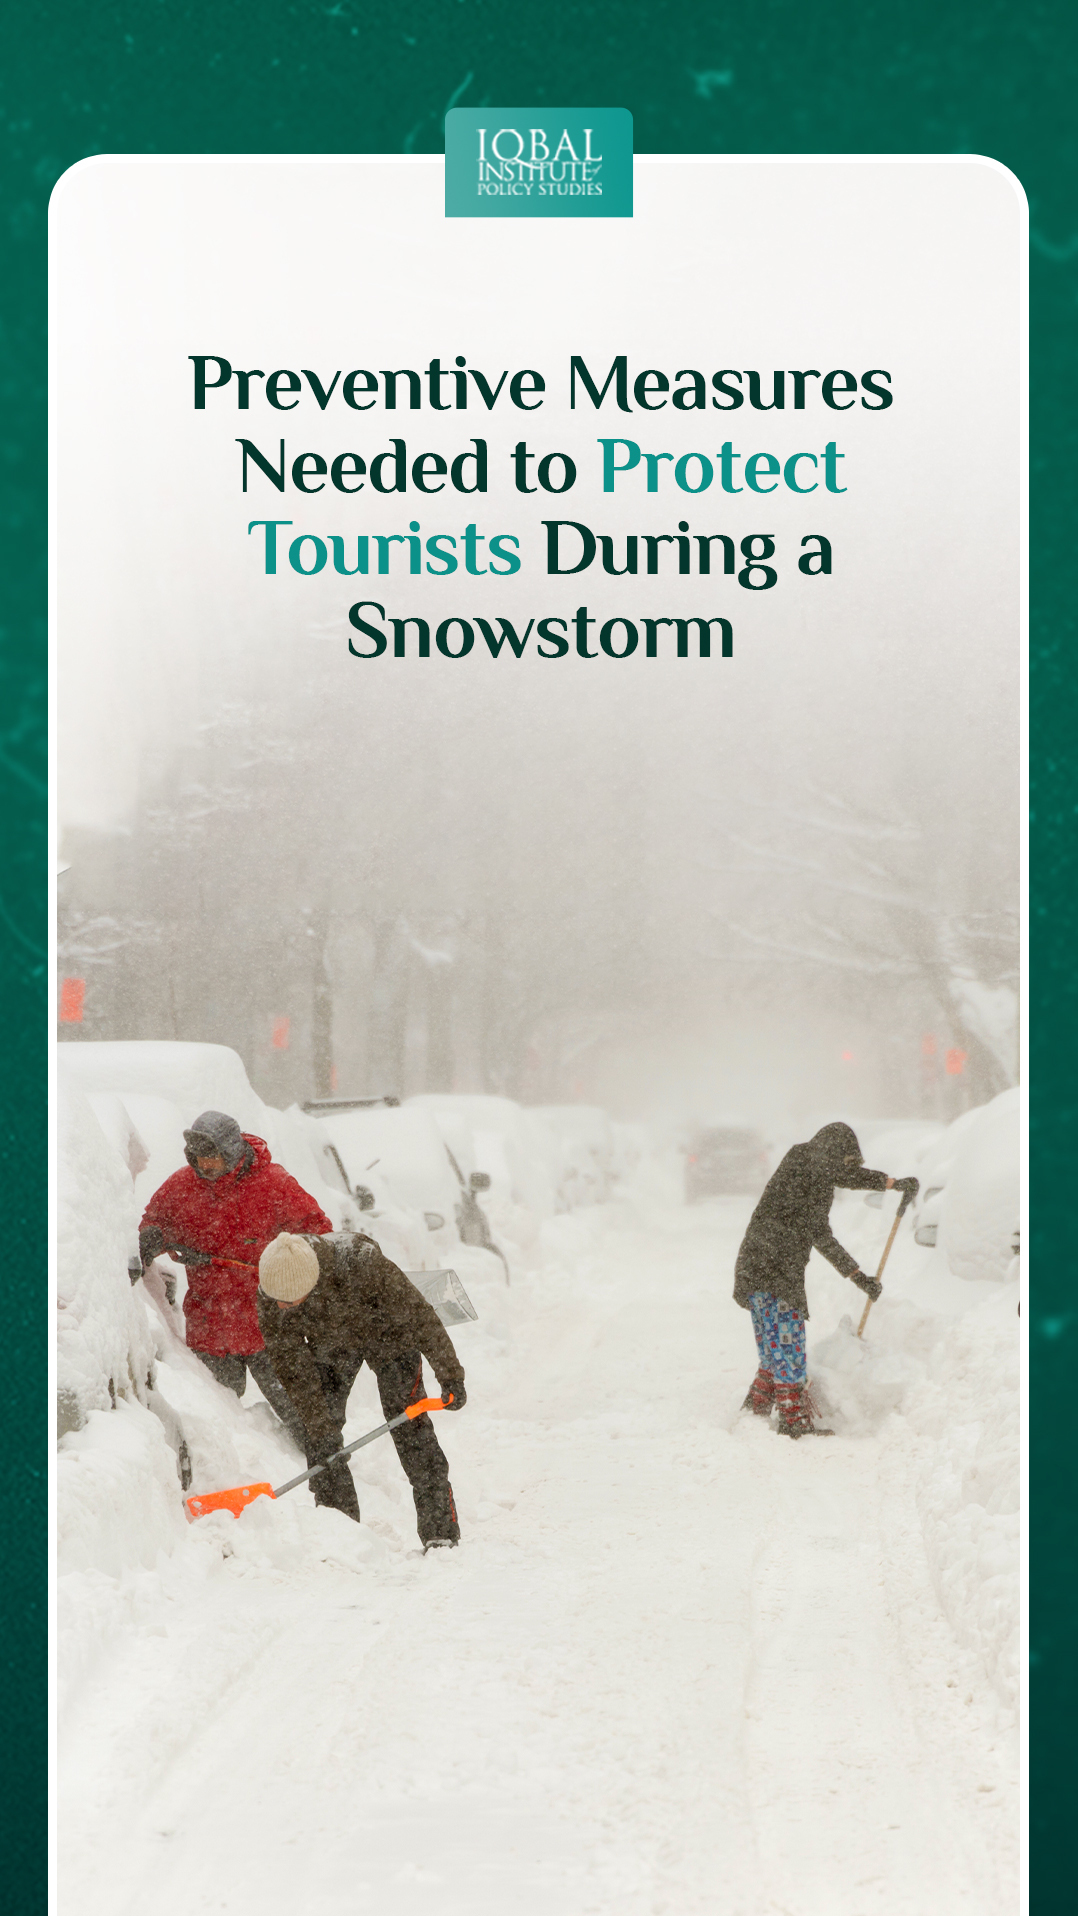 Preventive Measures Needed to Protect Tourists During a Snowstorm